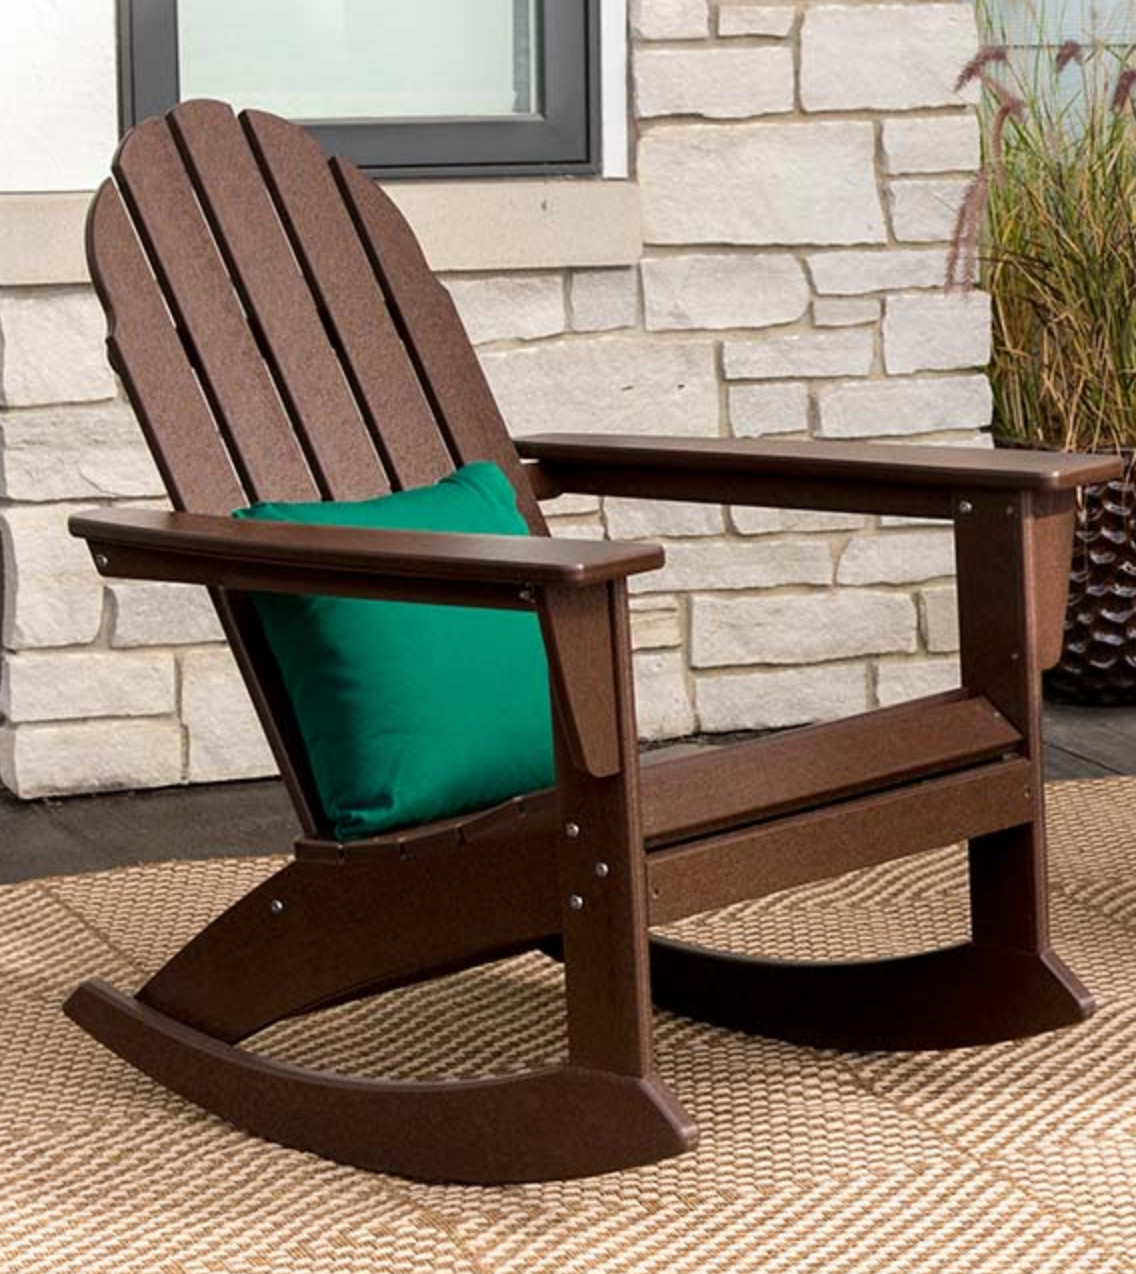 Dark brown wooden wide slatted rocking chair with curved back and straight arm rests, decorated with a dark green throw pillow outside on top of a striped rug